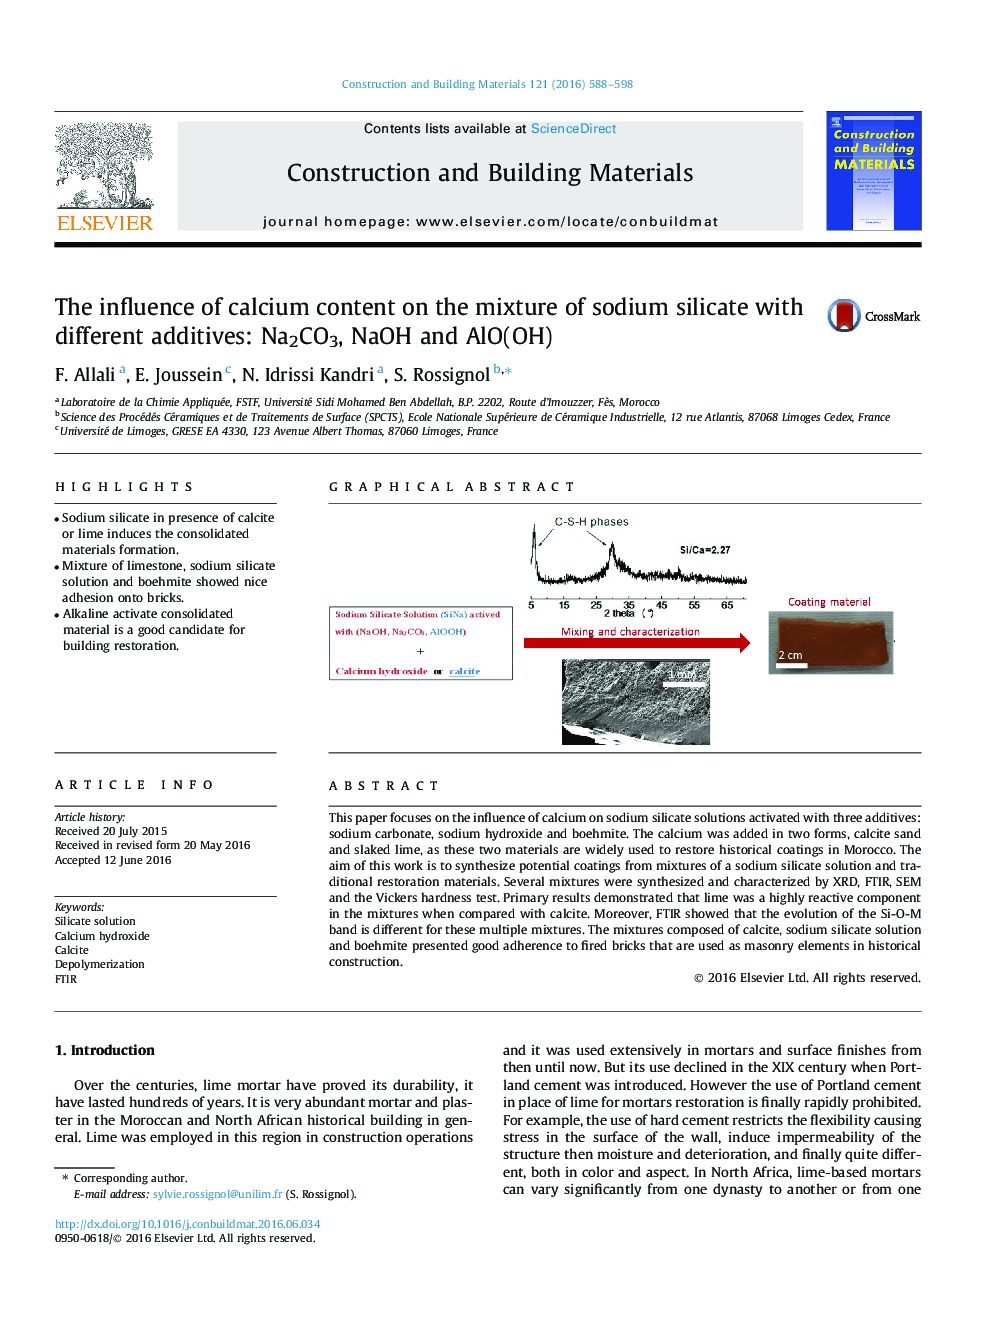 The influence of calcium content on the mixture of sodium silicate with different additives: Na2CO3, NaOH and AlO(OH)